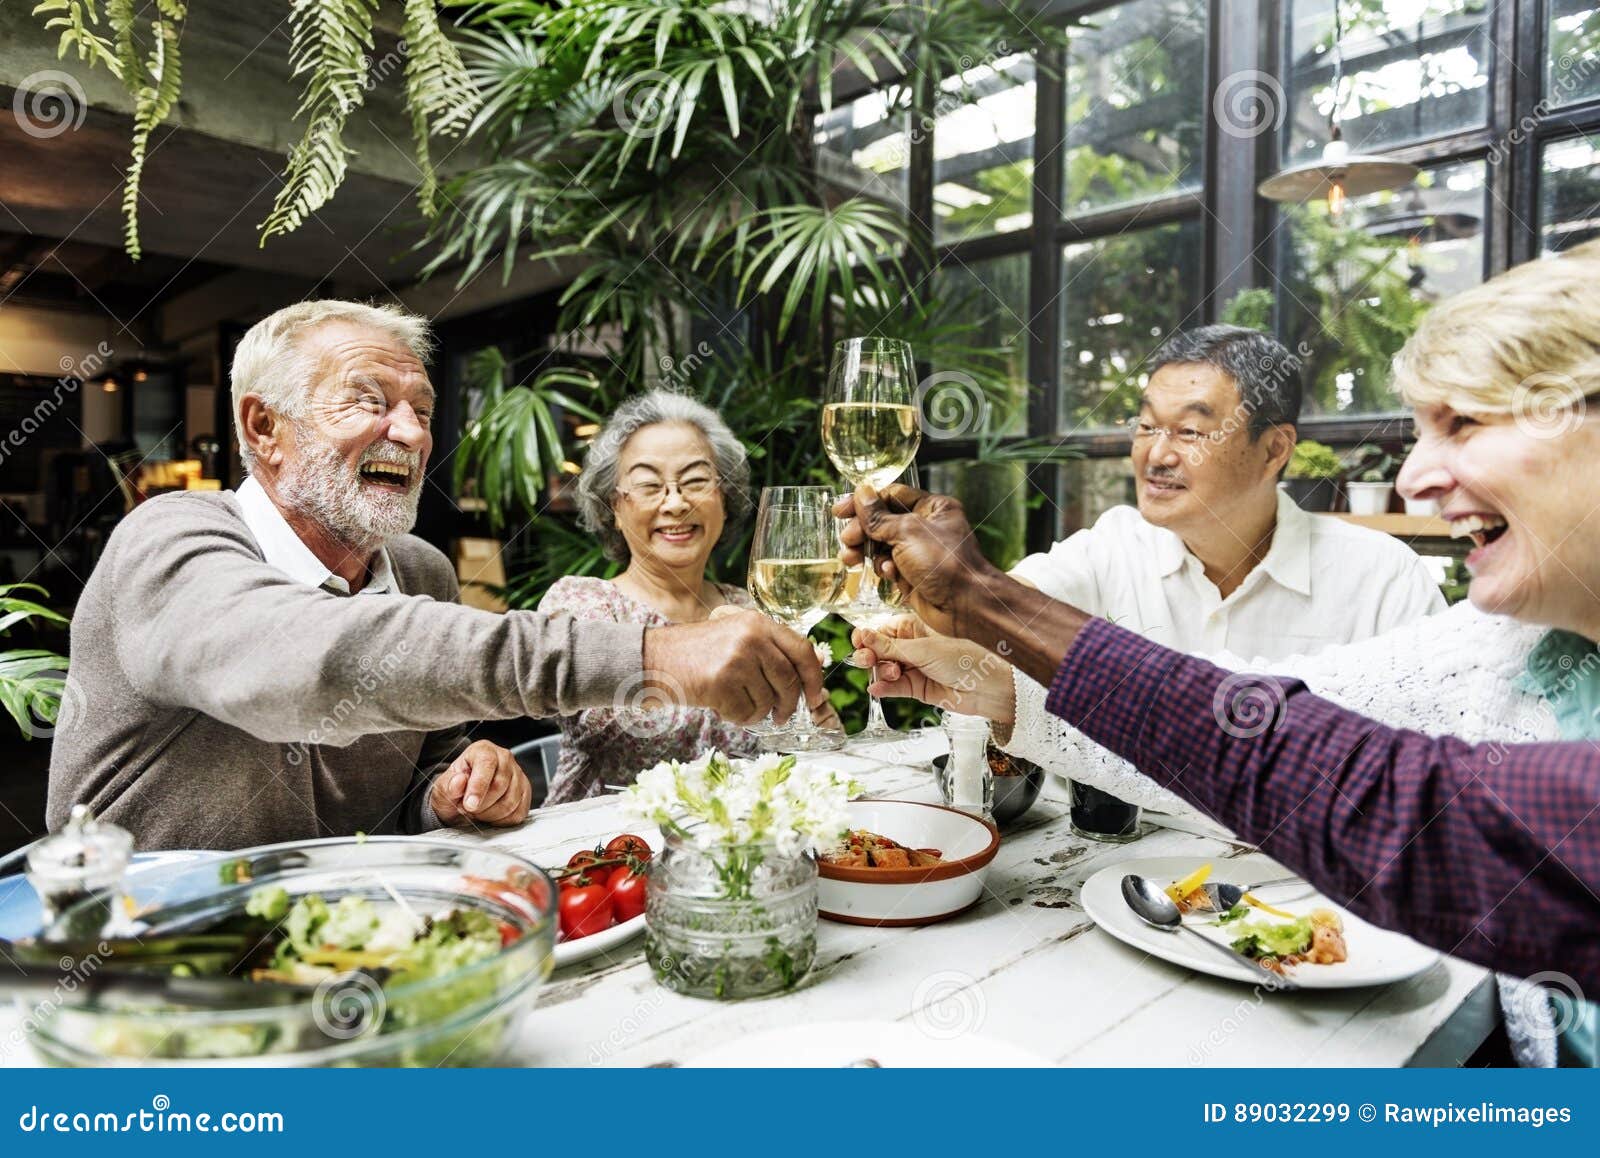 group of senior retirement meet up happiness concept